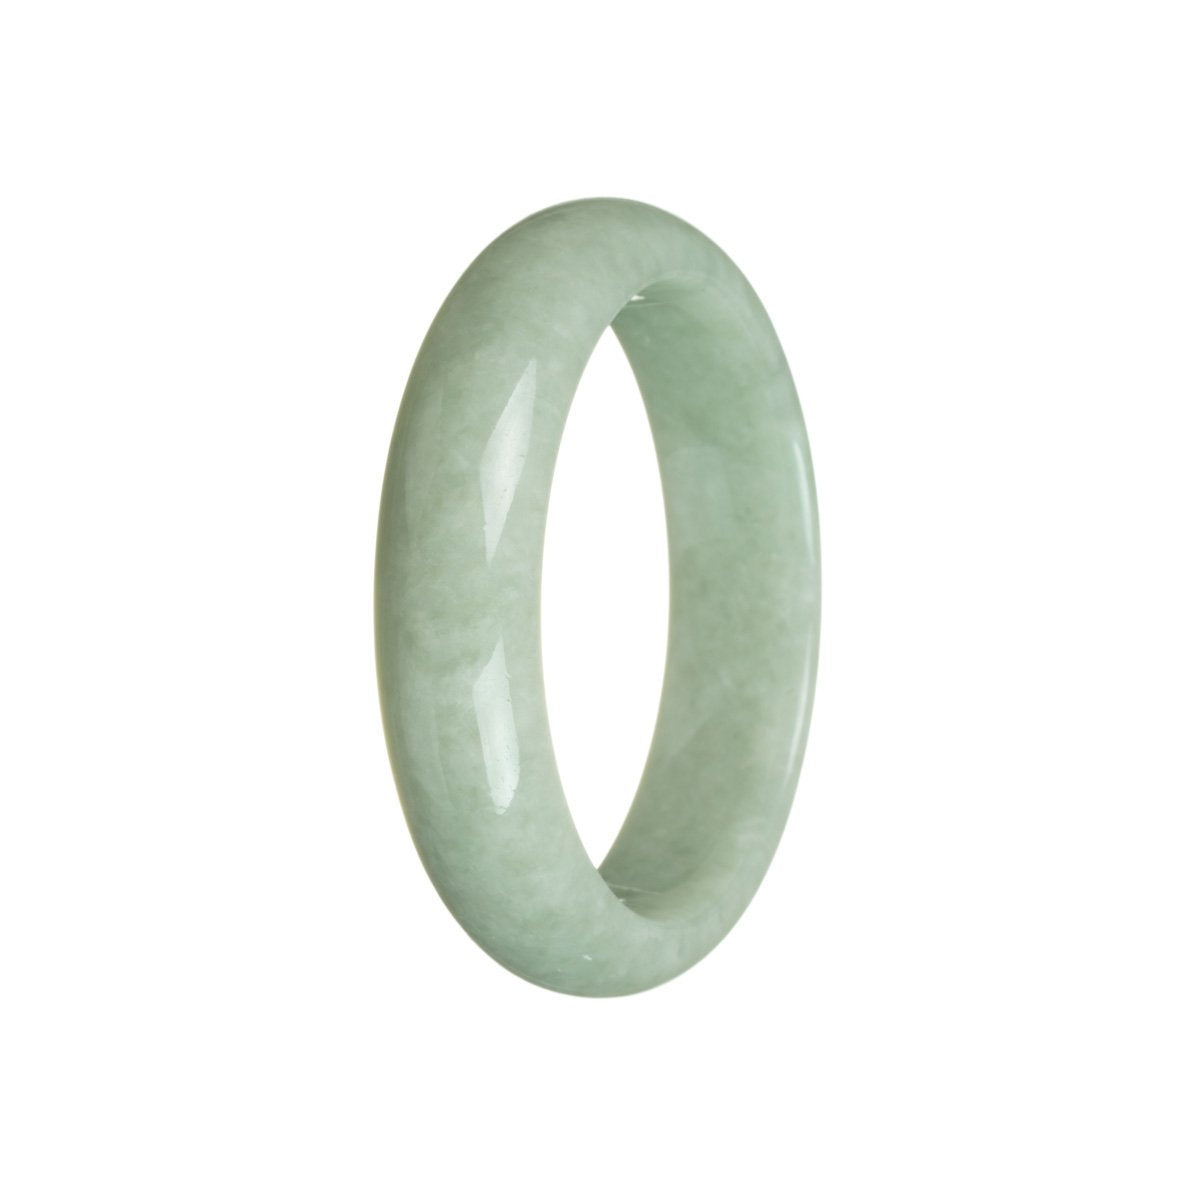 A beautiful green jade bracelet in the shape of a half moon, measuring 58mm. Crafted from genuine Grade A jade, this bracelet from MAYS is a stunning and timeless accessory.